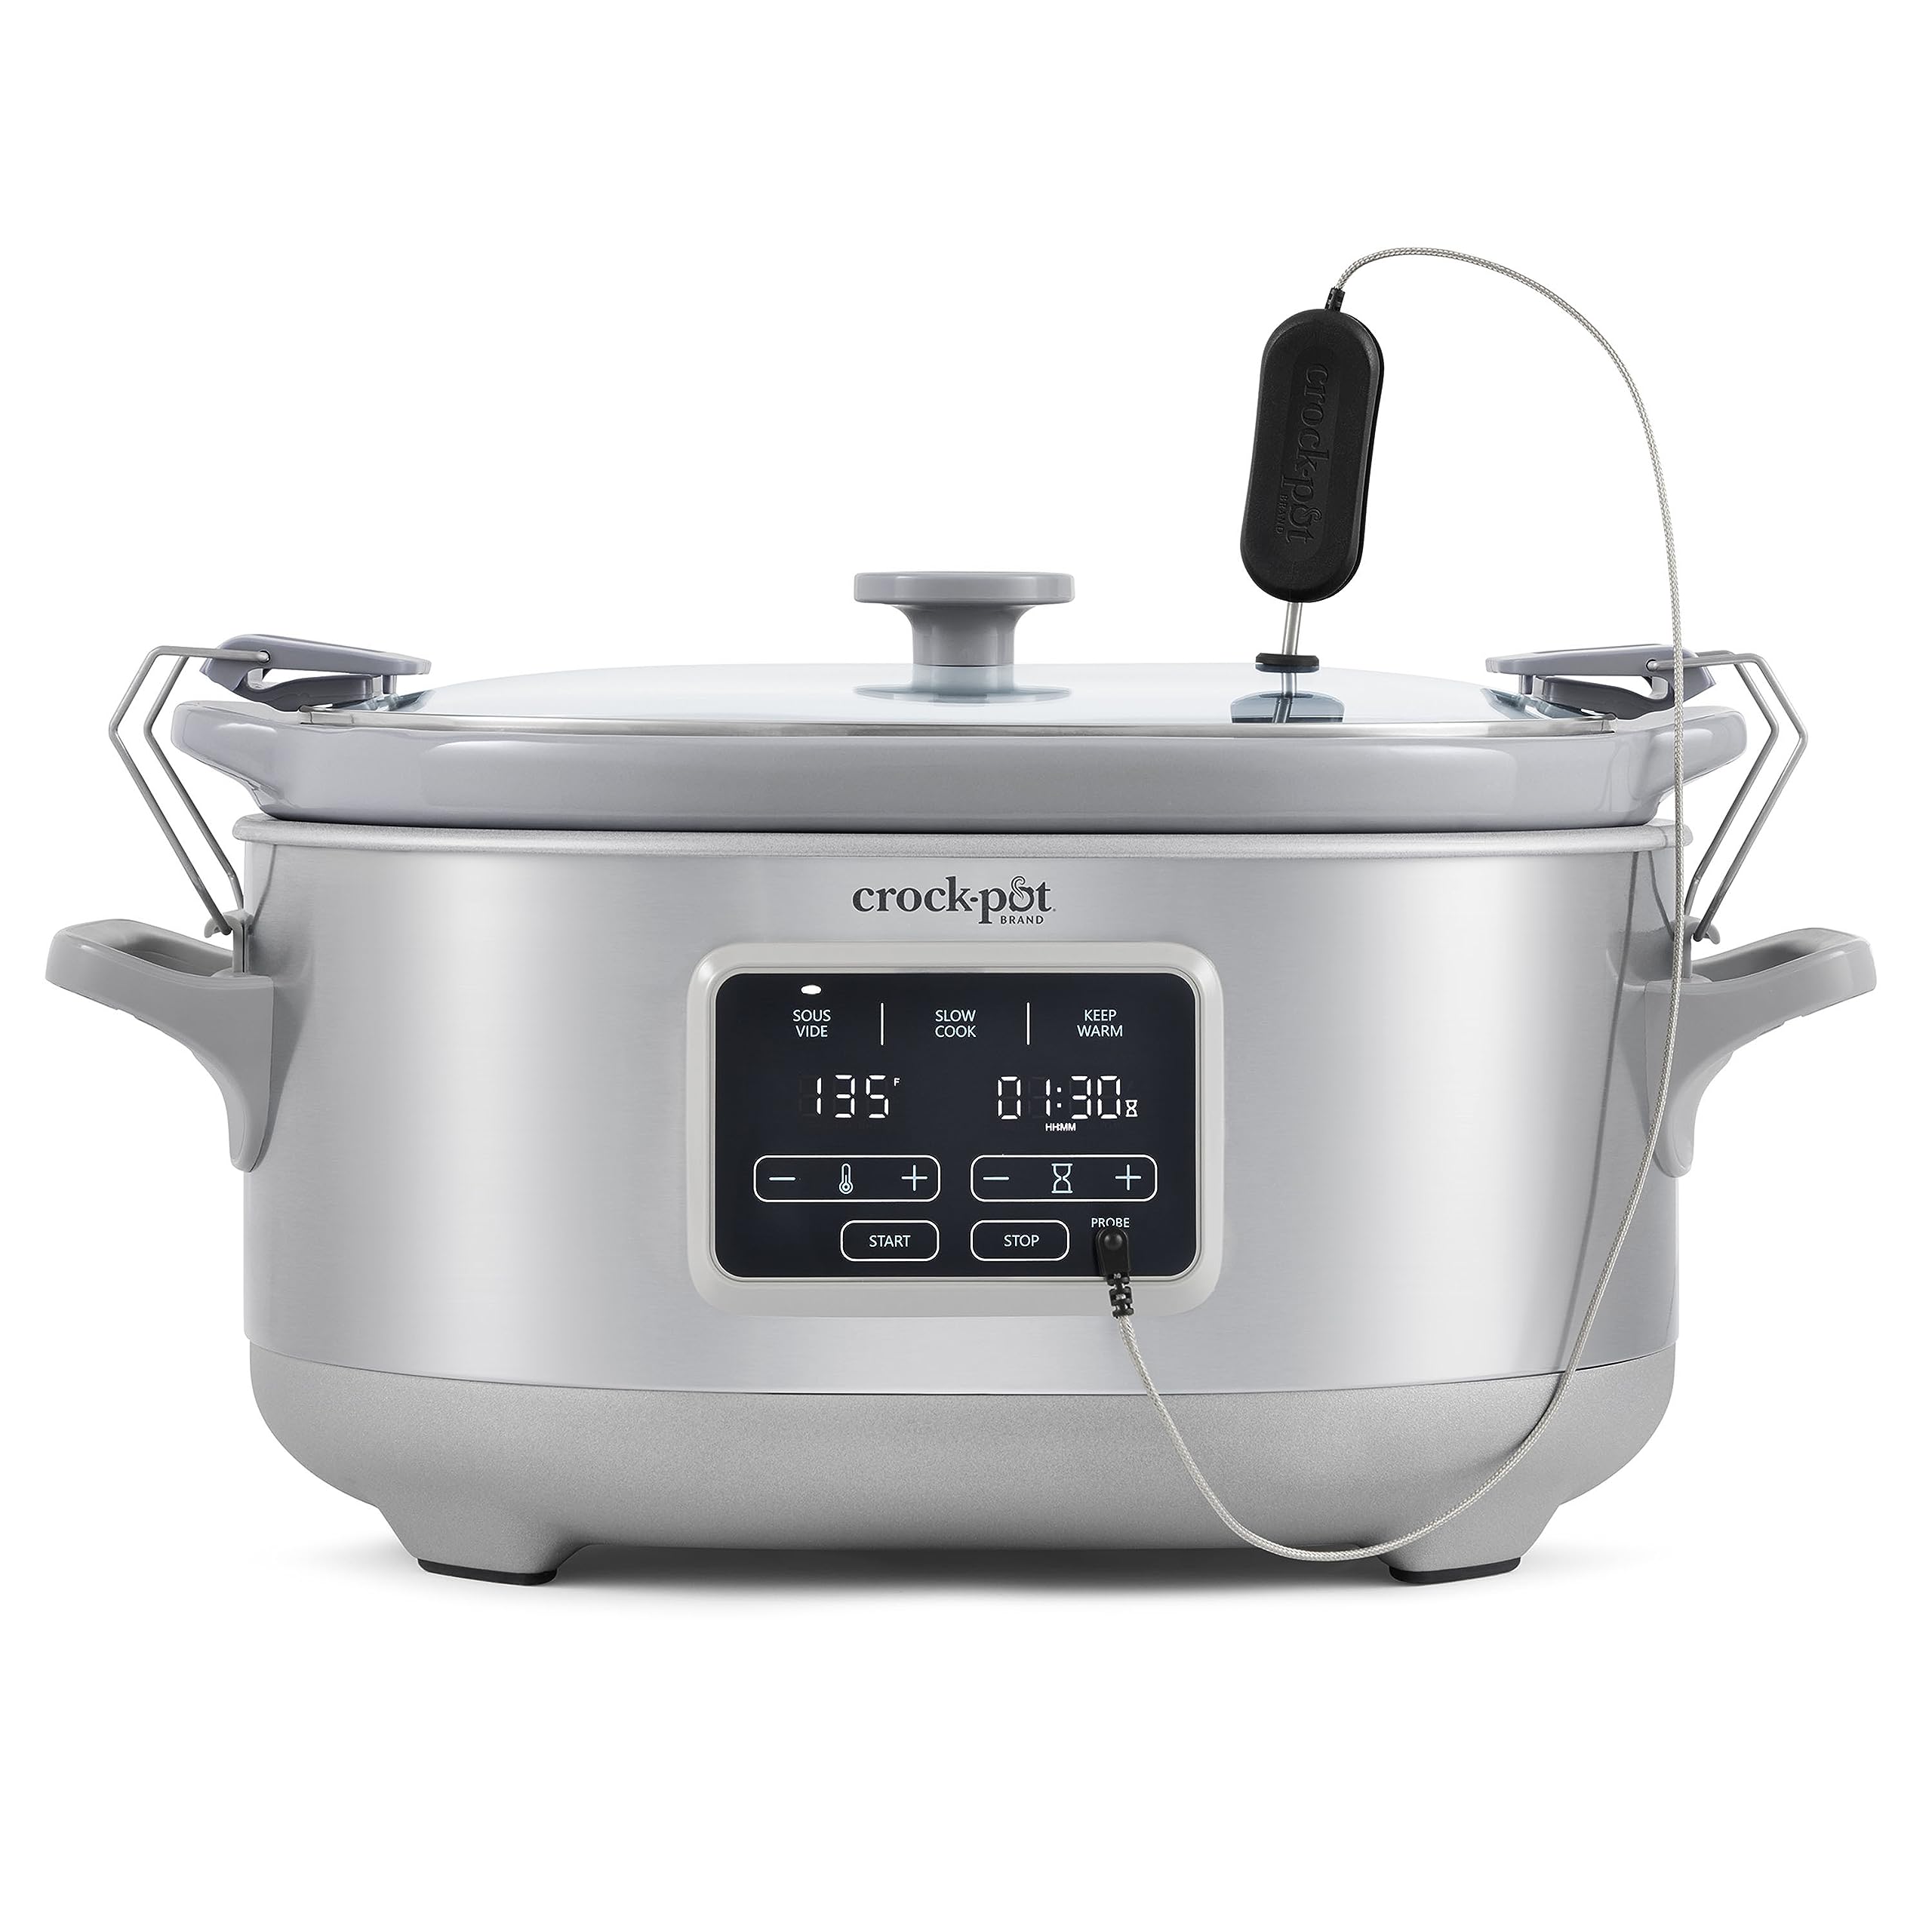 Crockpot™ 7-Quart Cook & Carry™ Slow Cooker with Sous Vide, Programmable, Stainless Steel